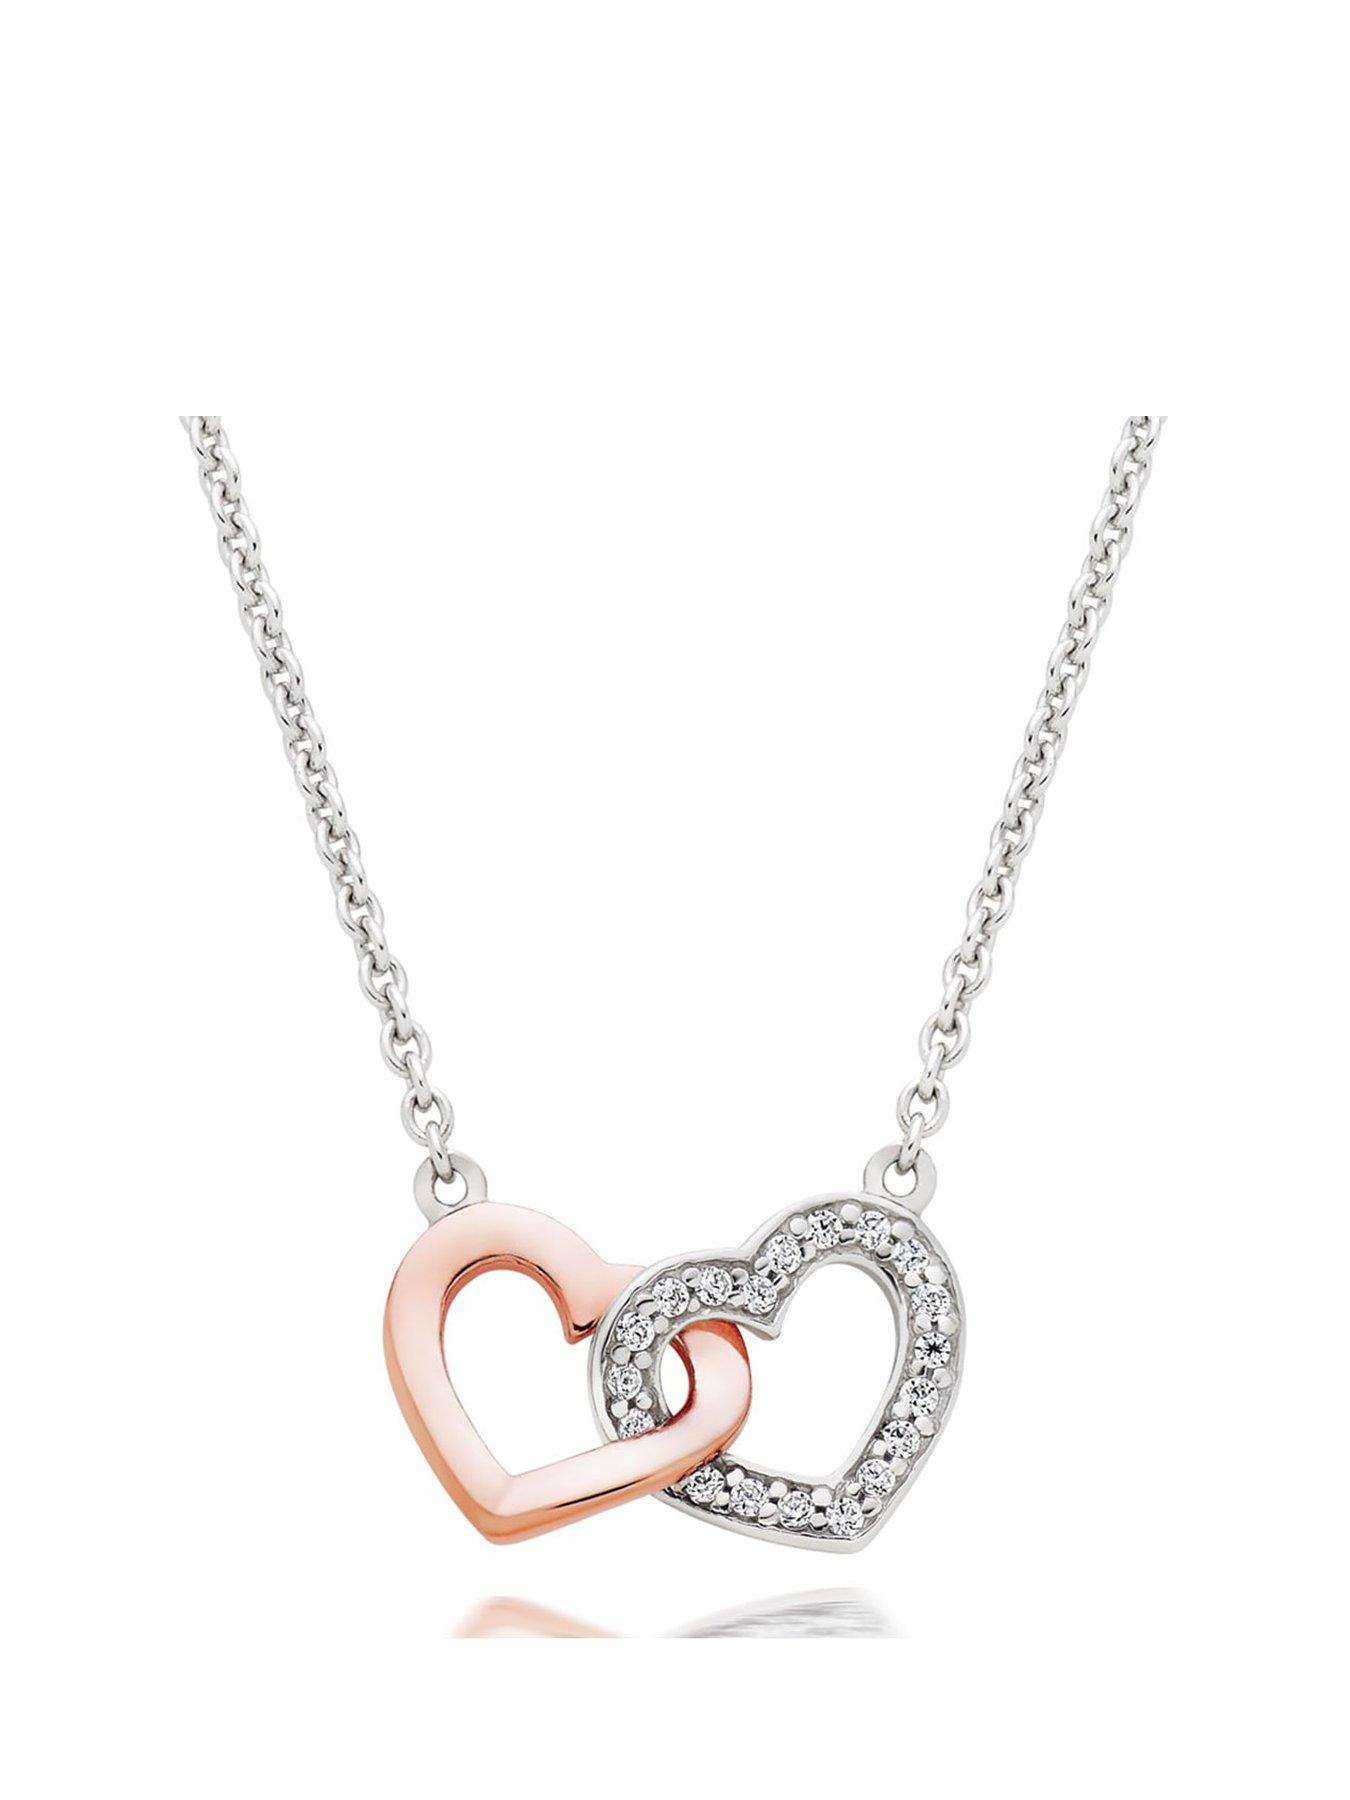  Cute Heart Necklace For Girls Birthday Gifts Age 8-10 10-12  4 5 6 7 8 9 10 11 12 13 Letter L Necklace Initial Little Girl Jewelry